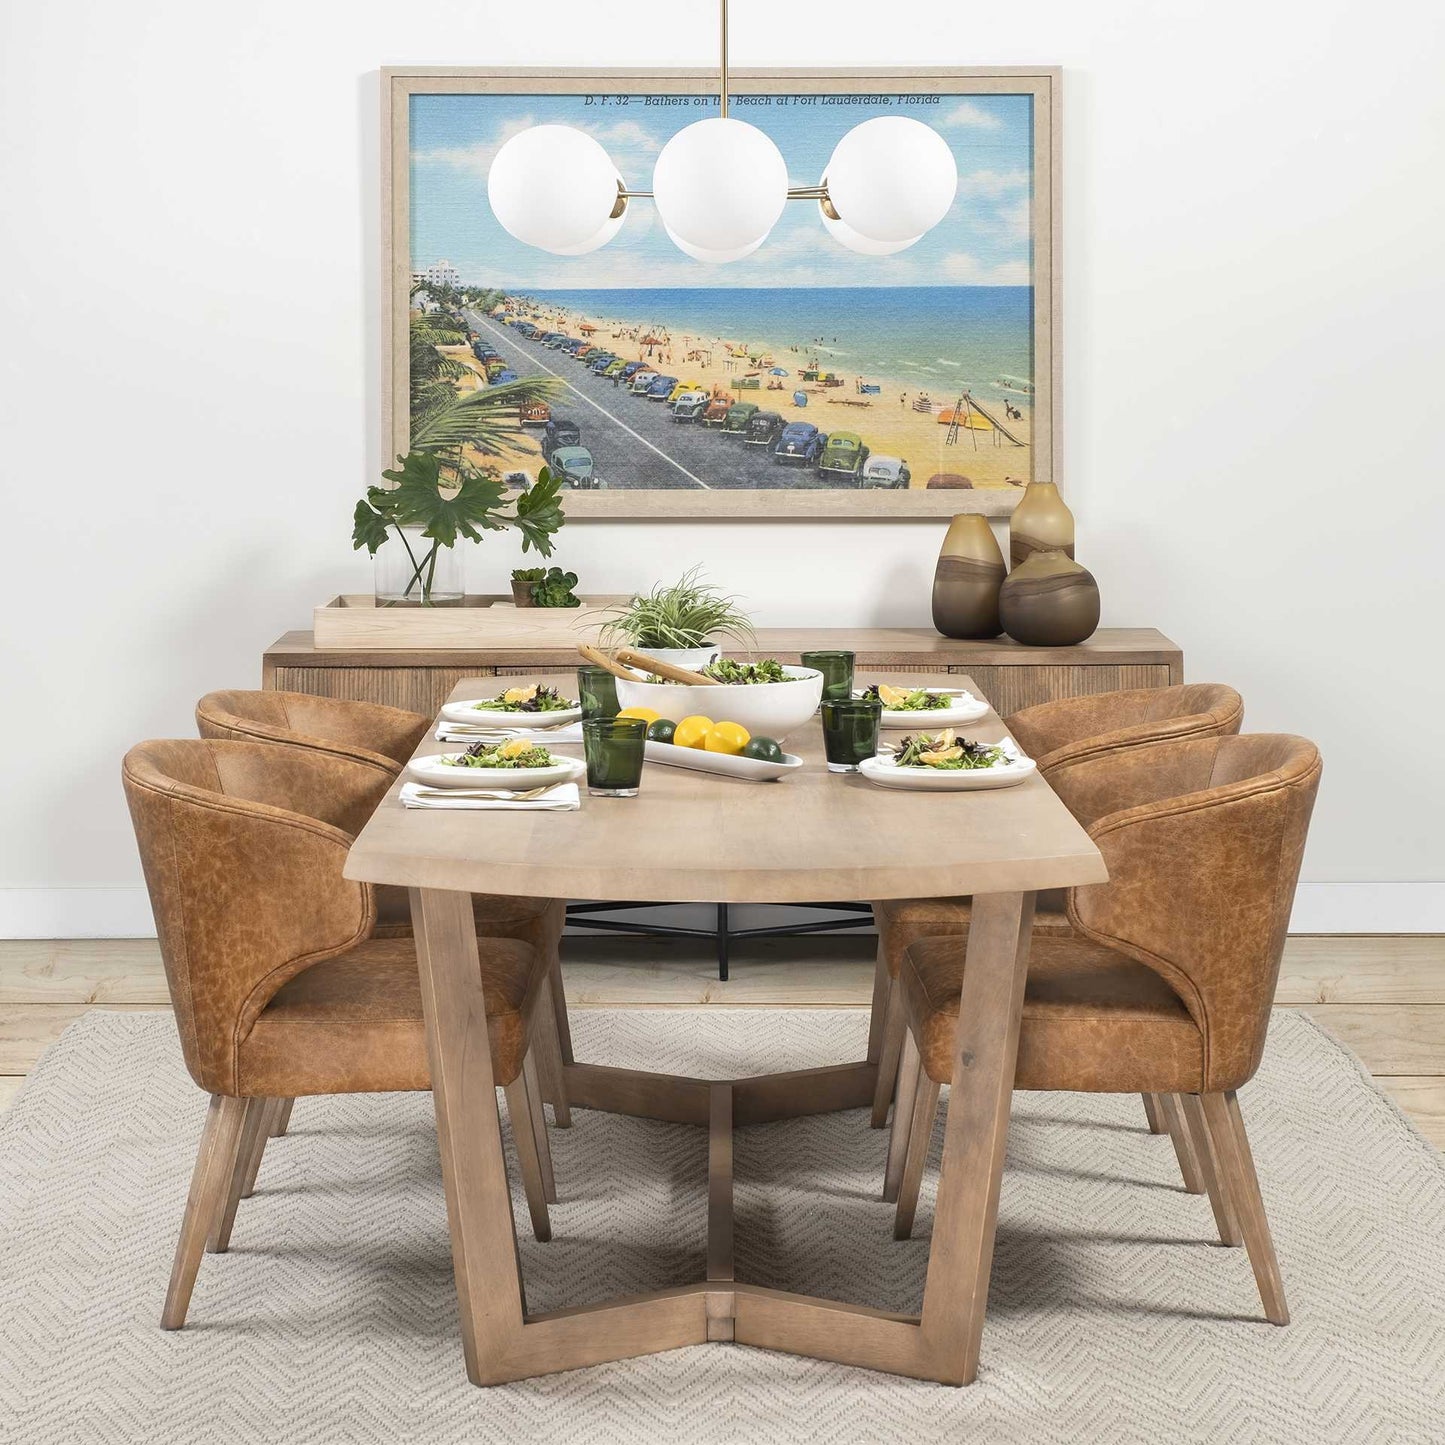 91.5X38 Rectangular Brown Solid Wood Top And Base Dining Table